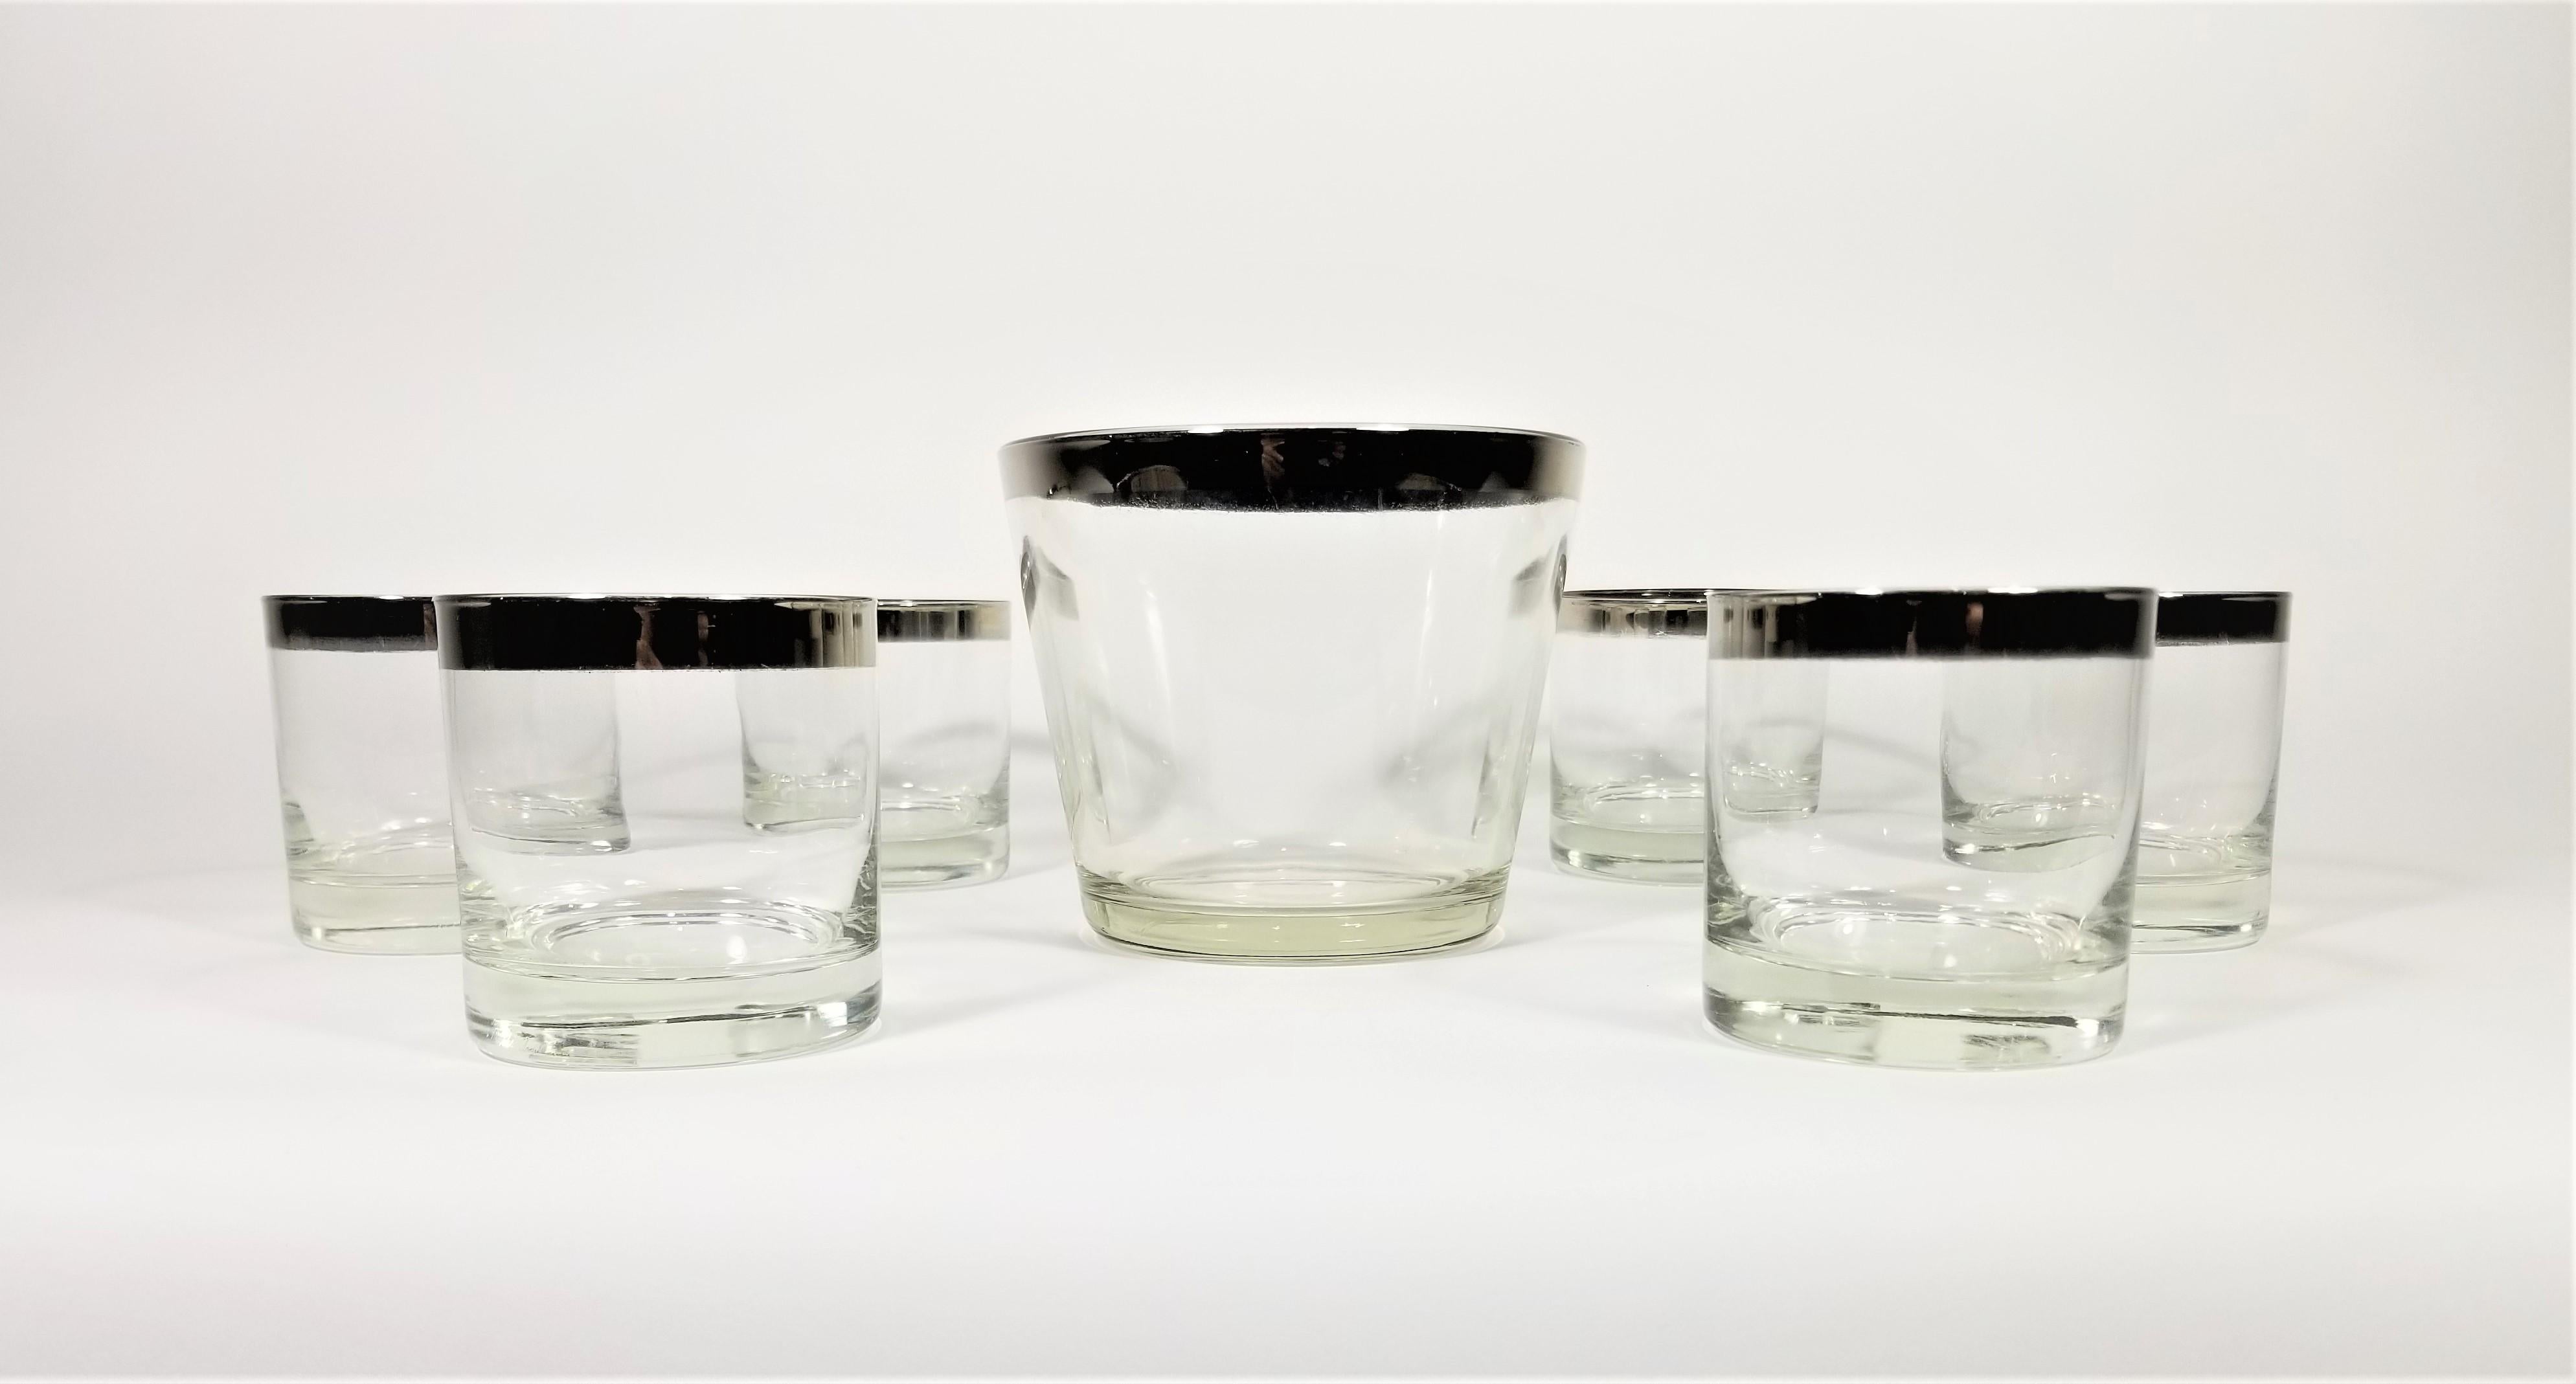 Dorothy Thorpe glassware barware set with ice bucket. Midcentury, 1960s. Silver rimmed design. Excellent addition to any home bar or bar cart.

Measurements:
Glasses
Height 3.38 inches
Diameter 3.25 inches

Ice bucket
Height 4.88